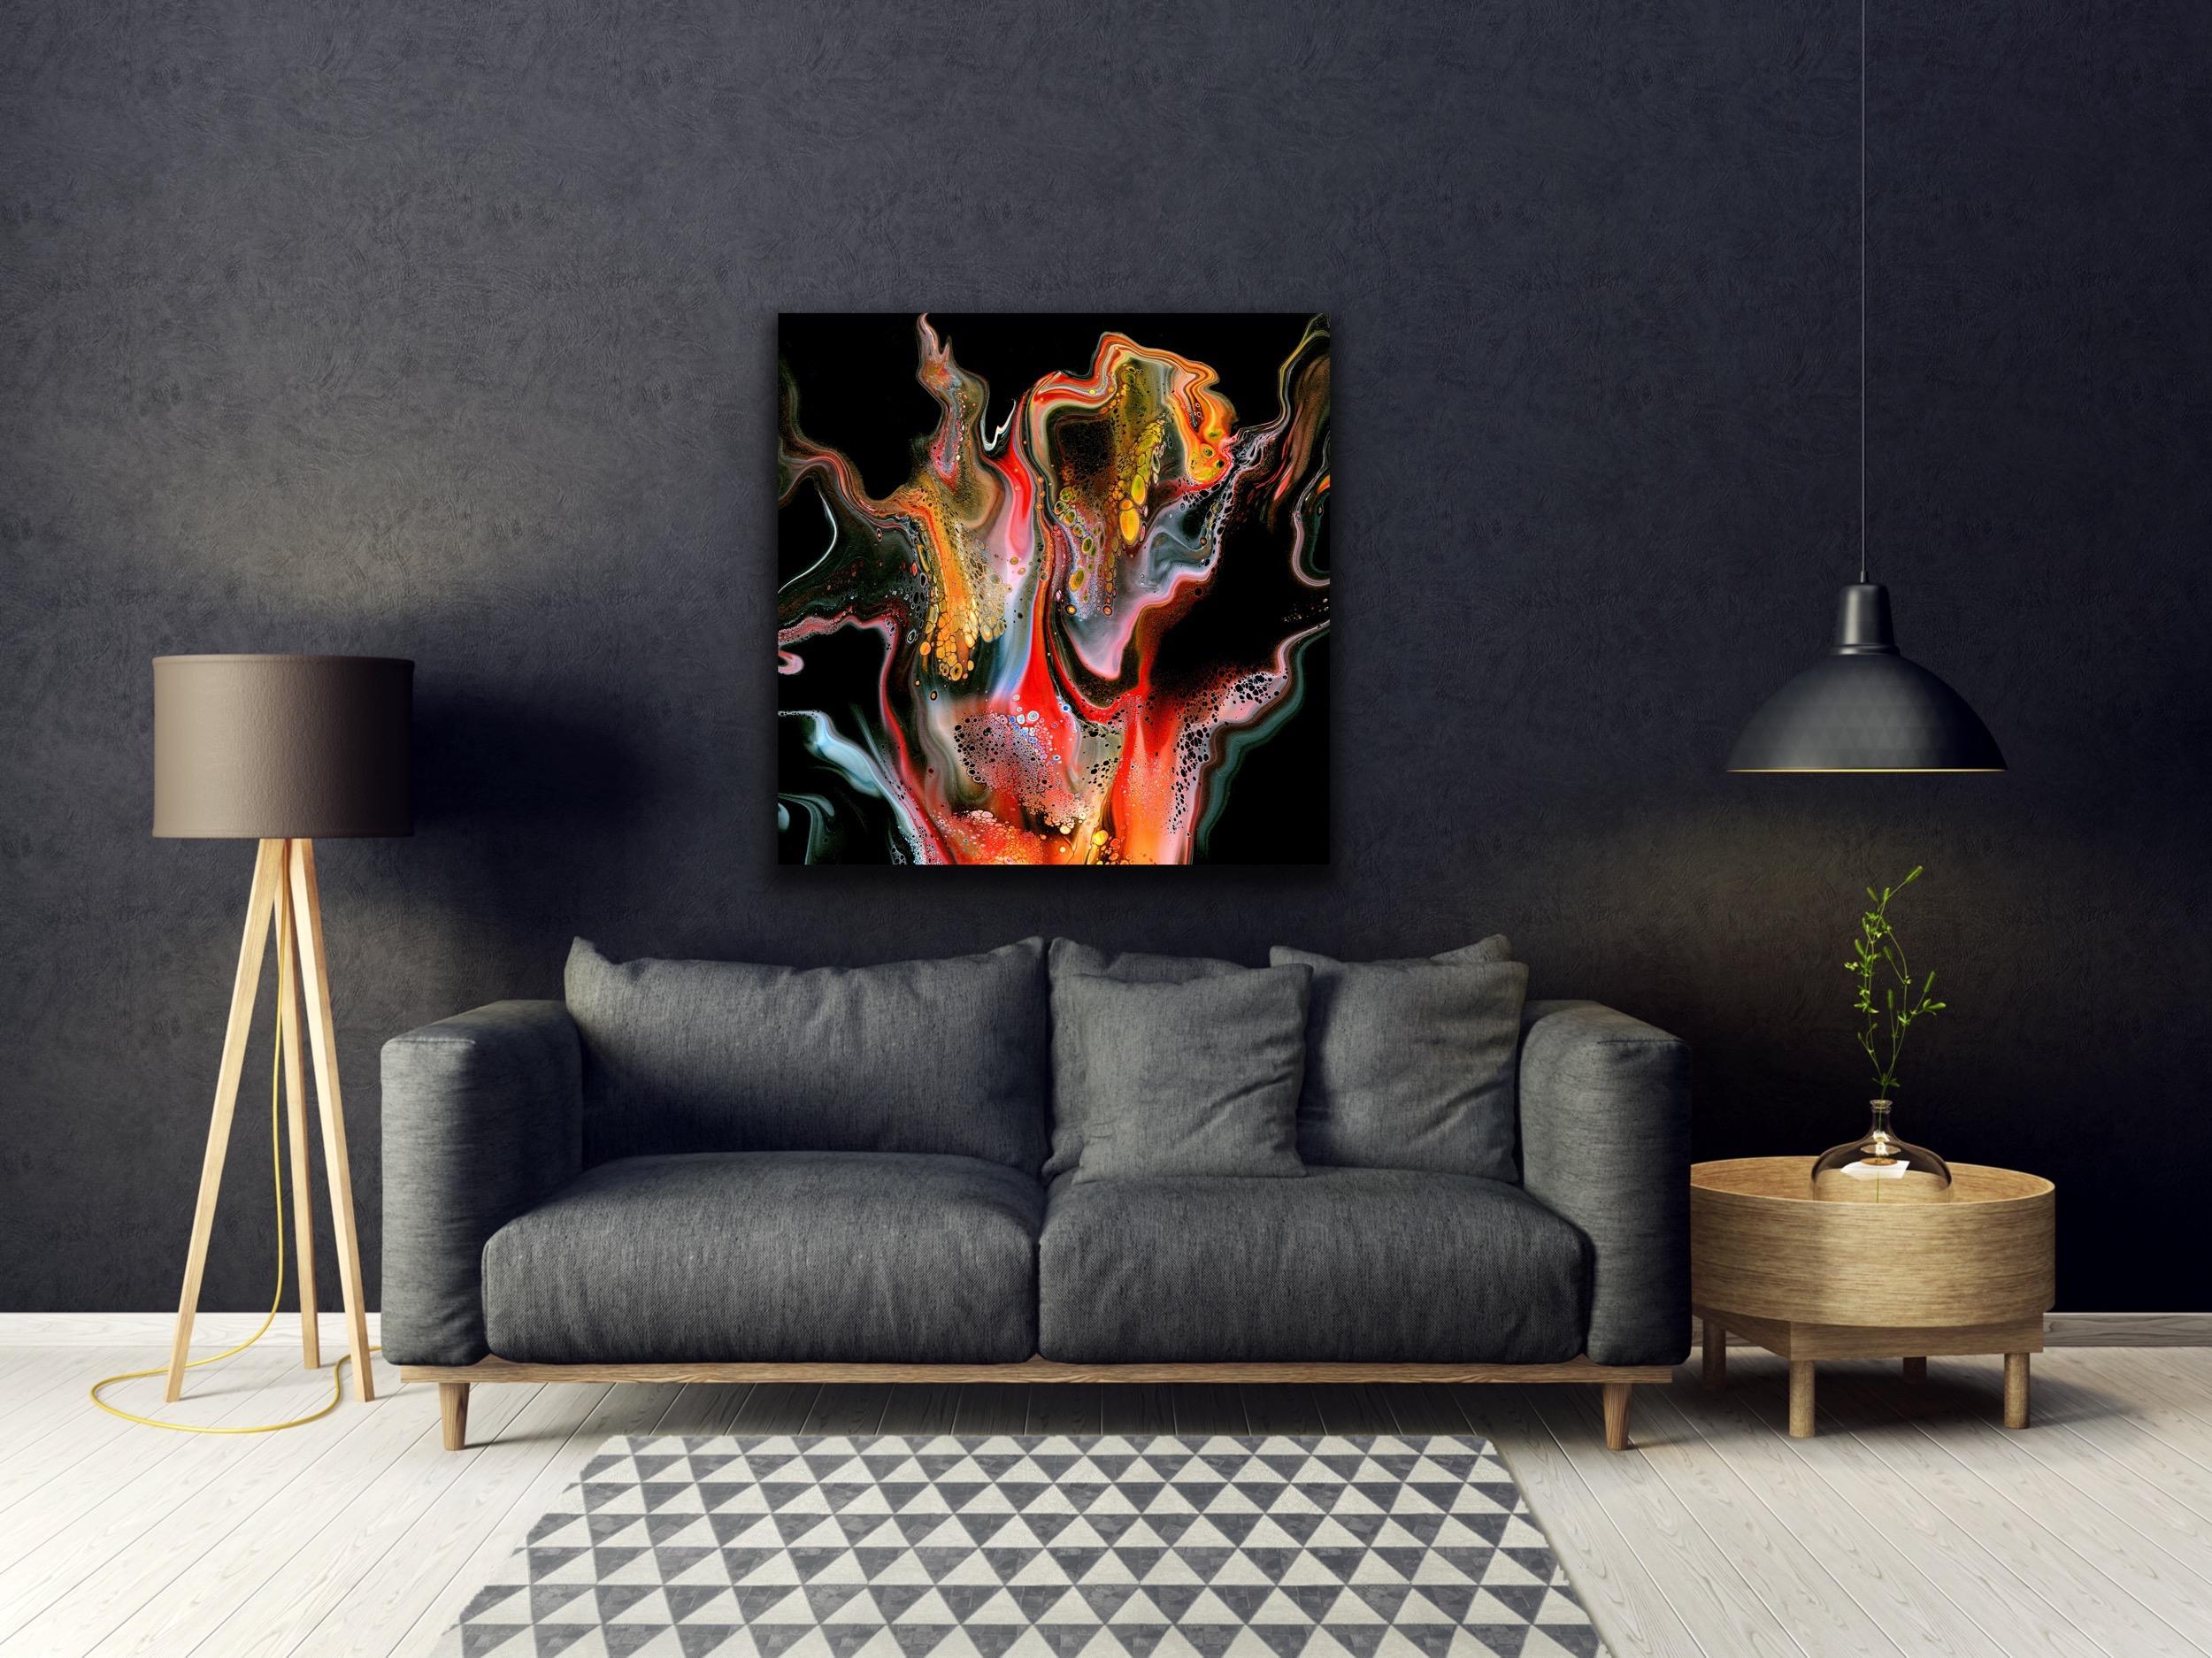 Contemporary Modern Abstract, Giclee Print on Metal, Limited Edition, by Cessy  For Sale 3